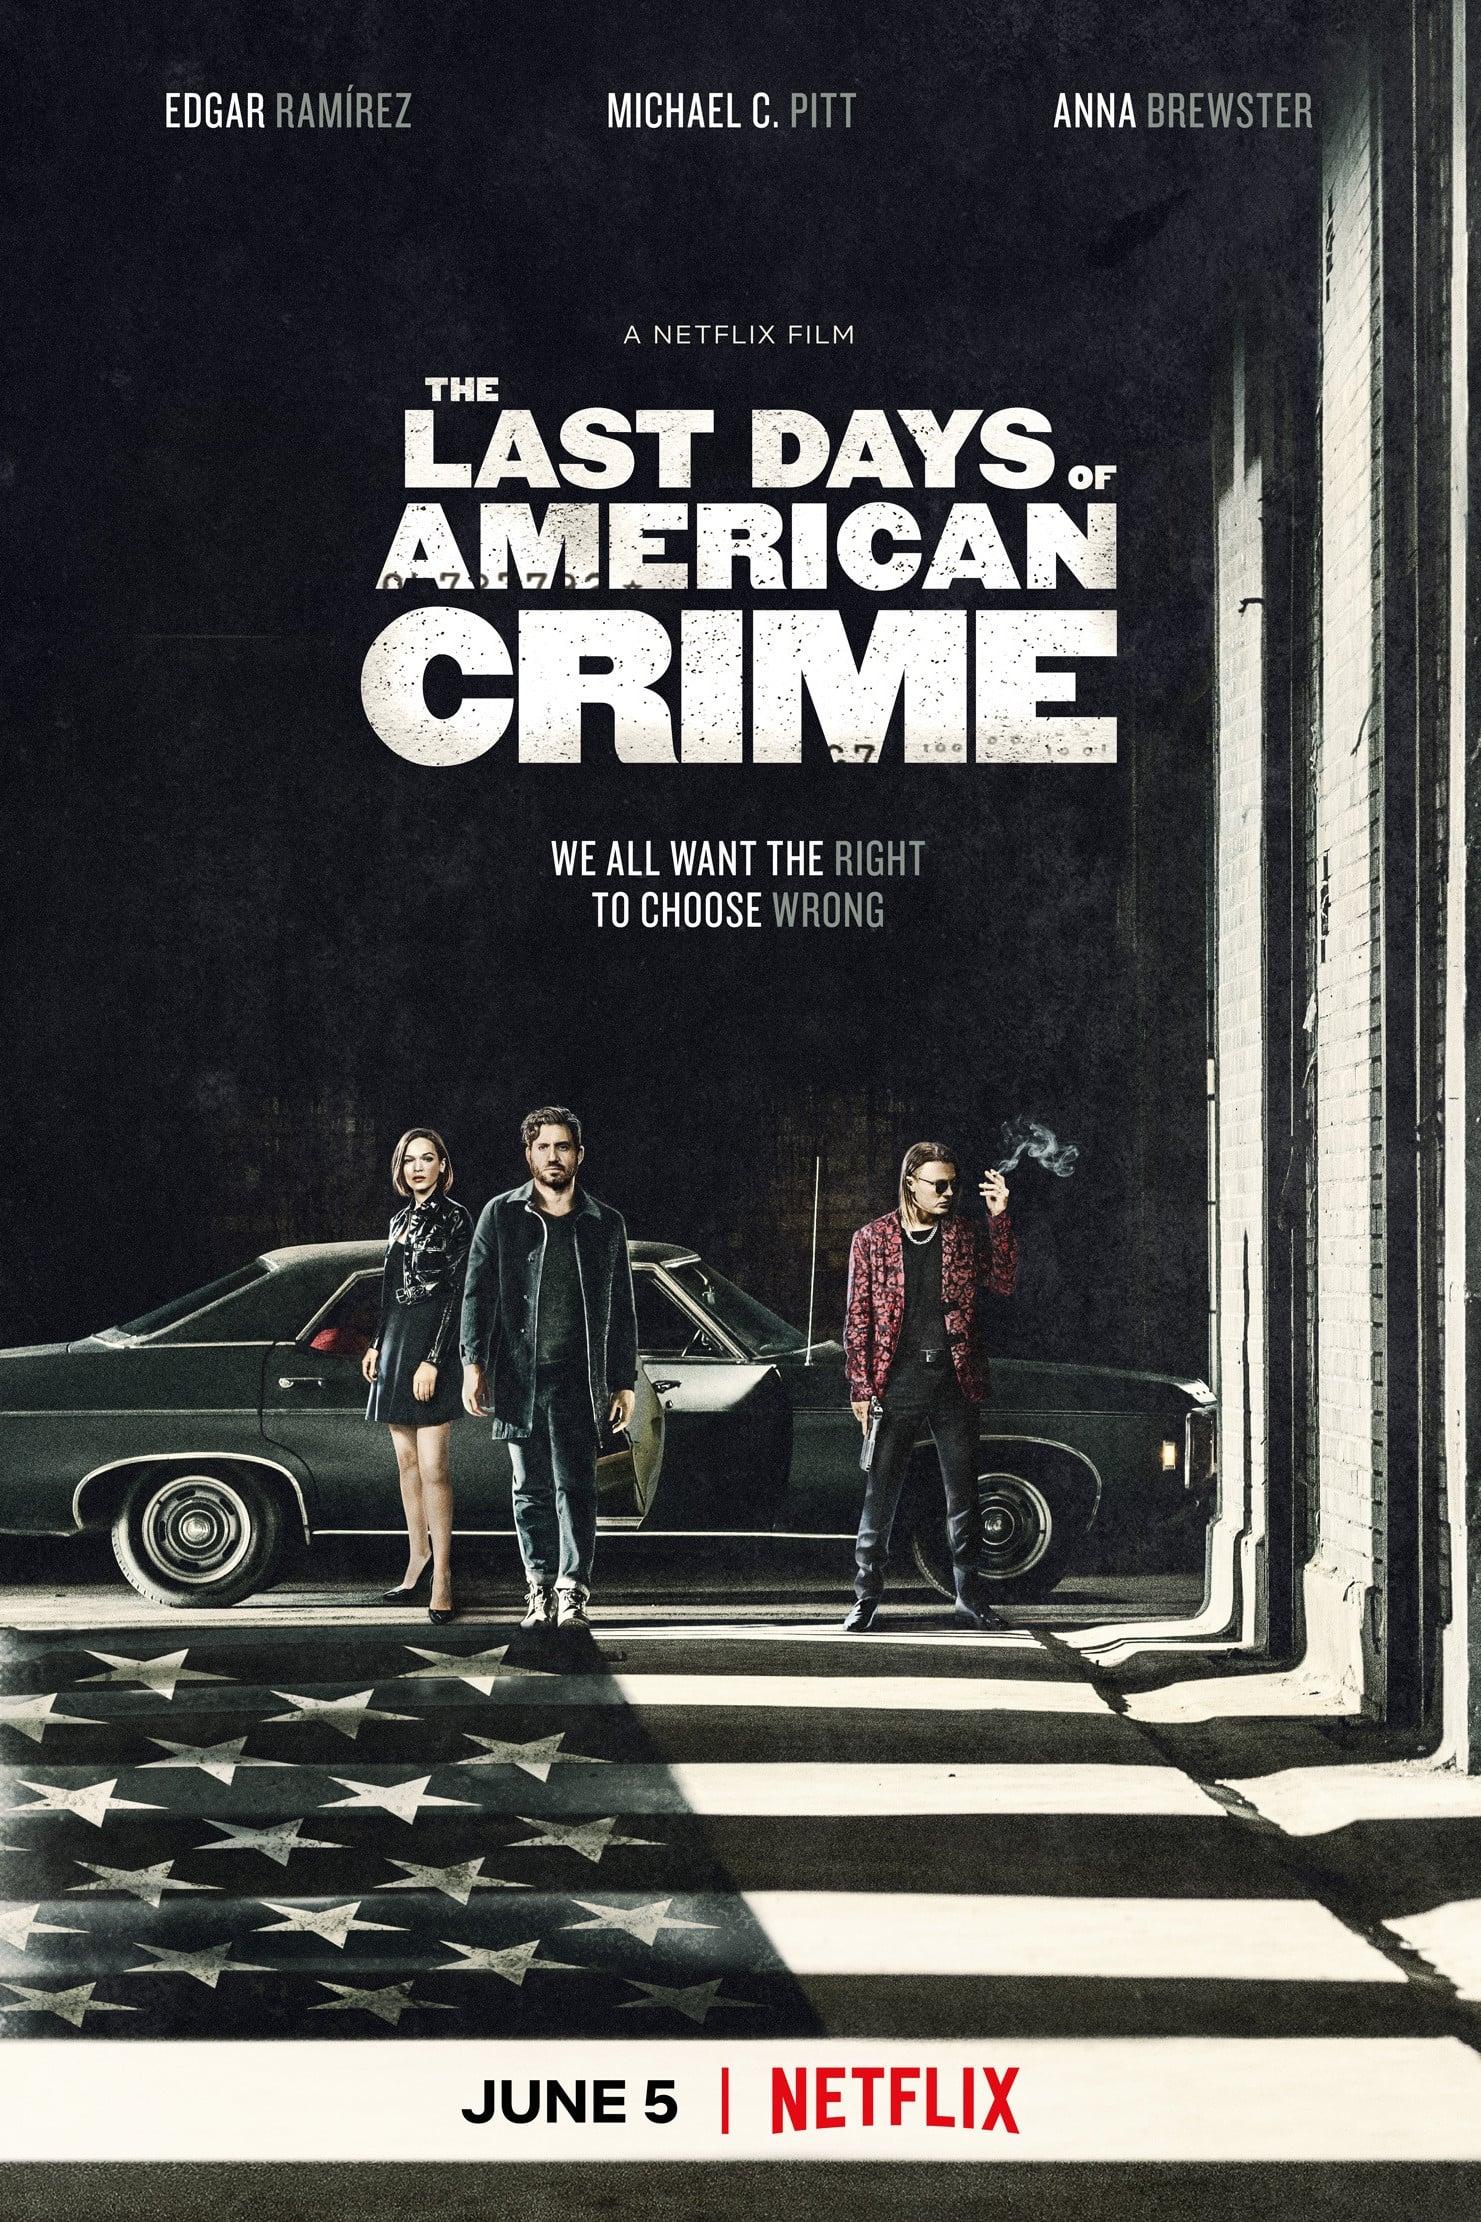 The Last Days of American Crime poster